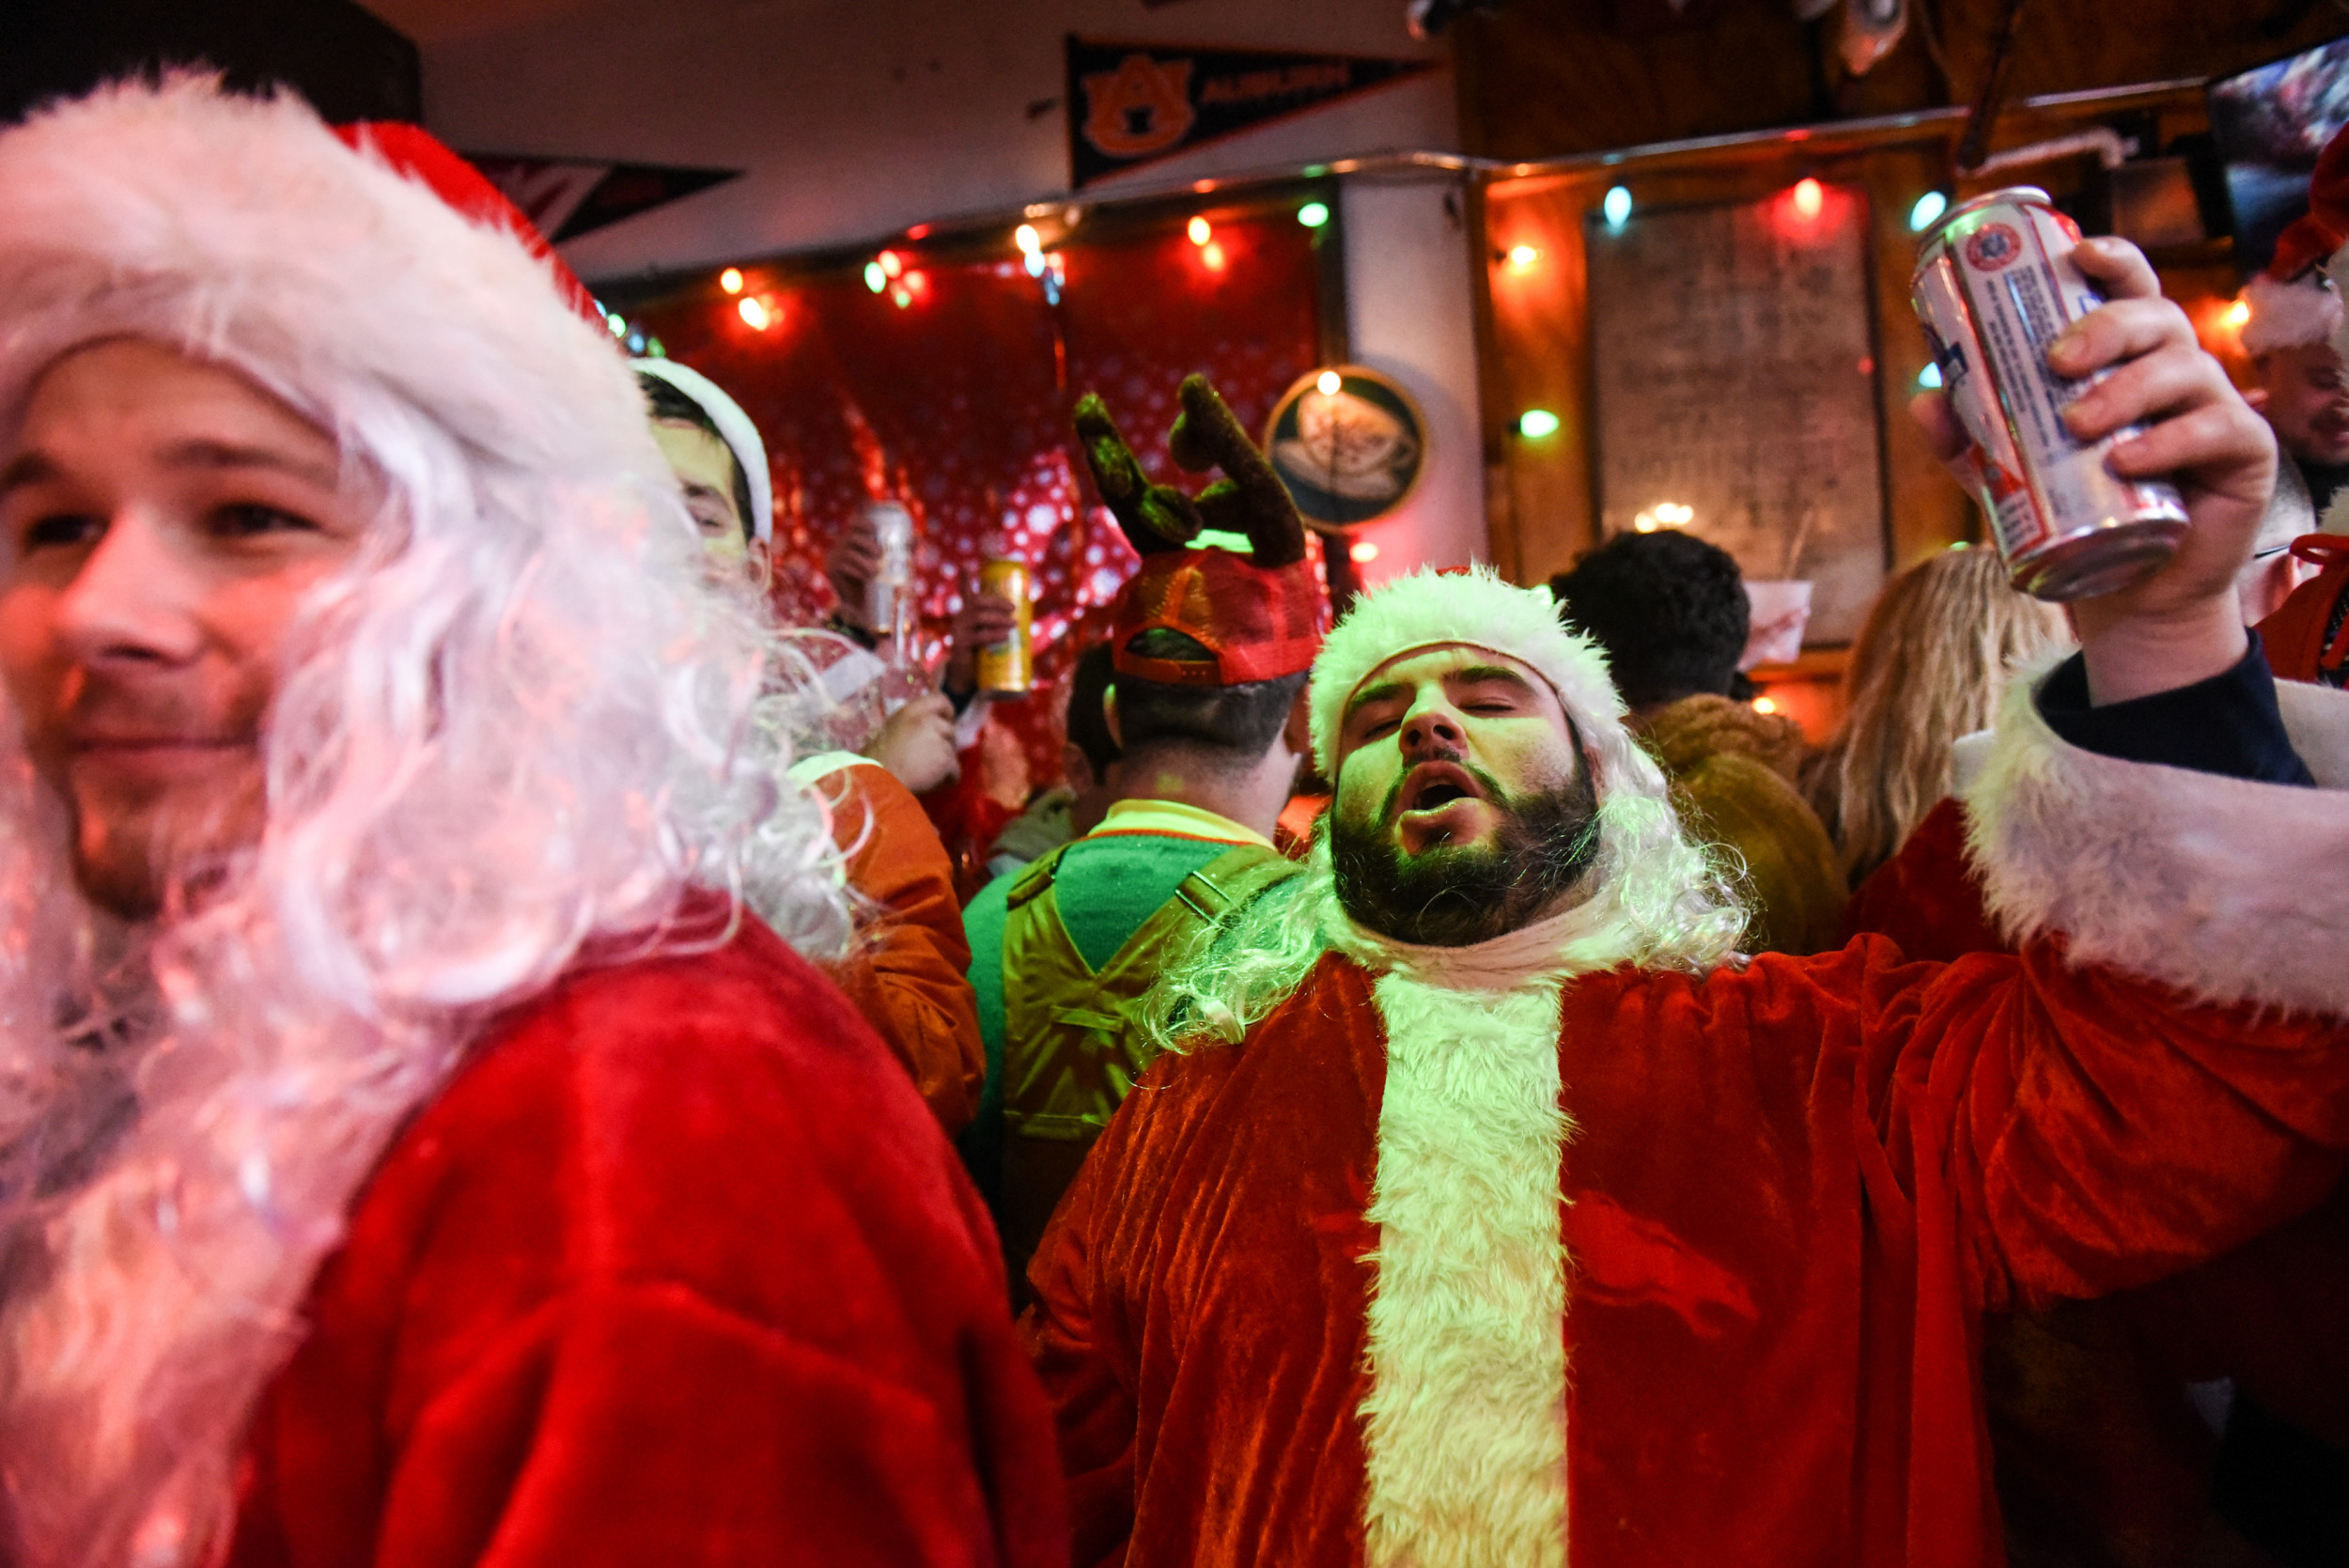 NYC SantaCon Gets Shipwrecked After Party Boats Canceled Before Weekend